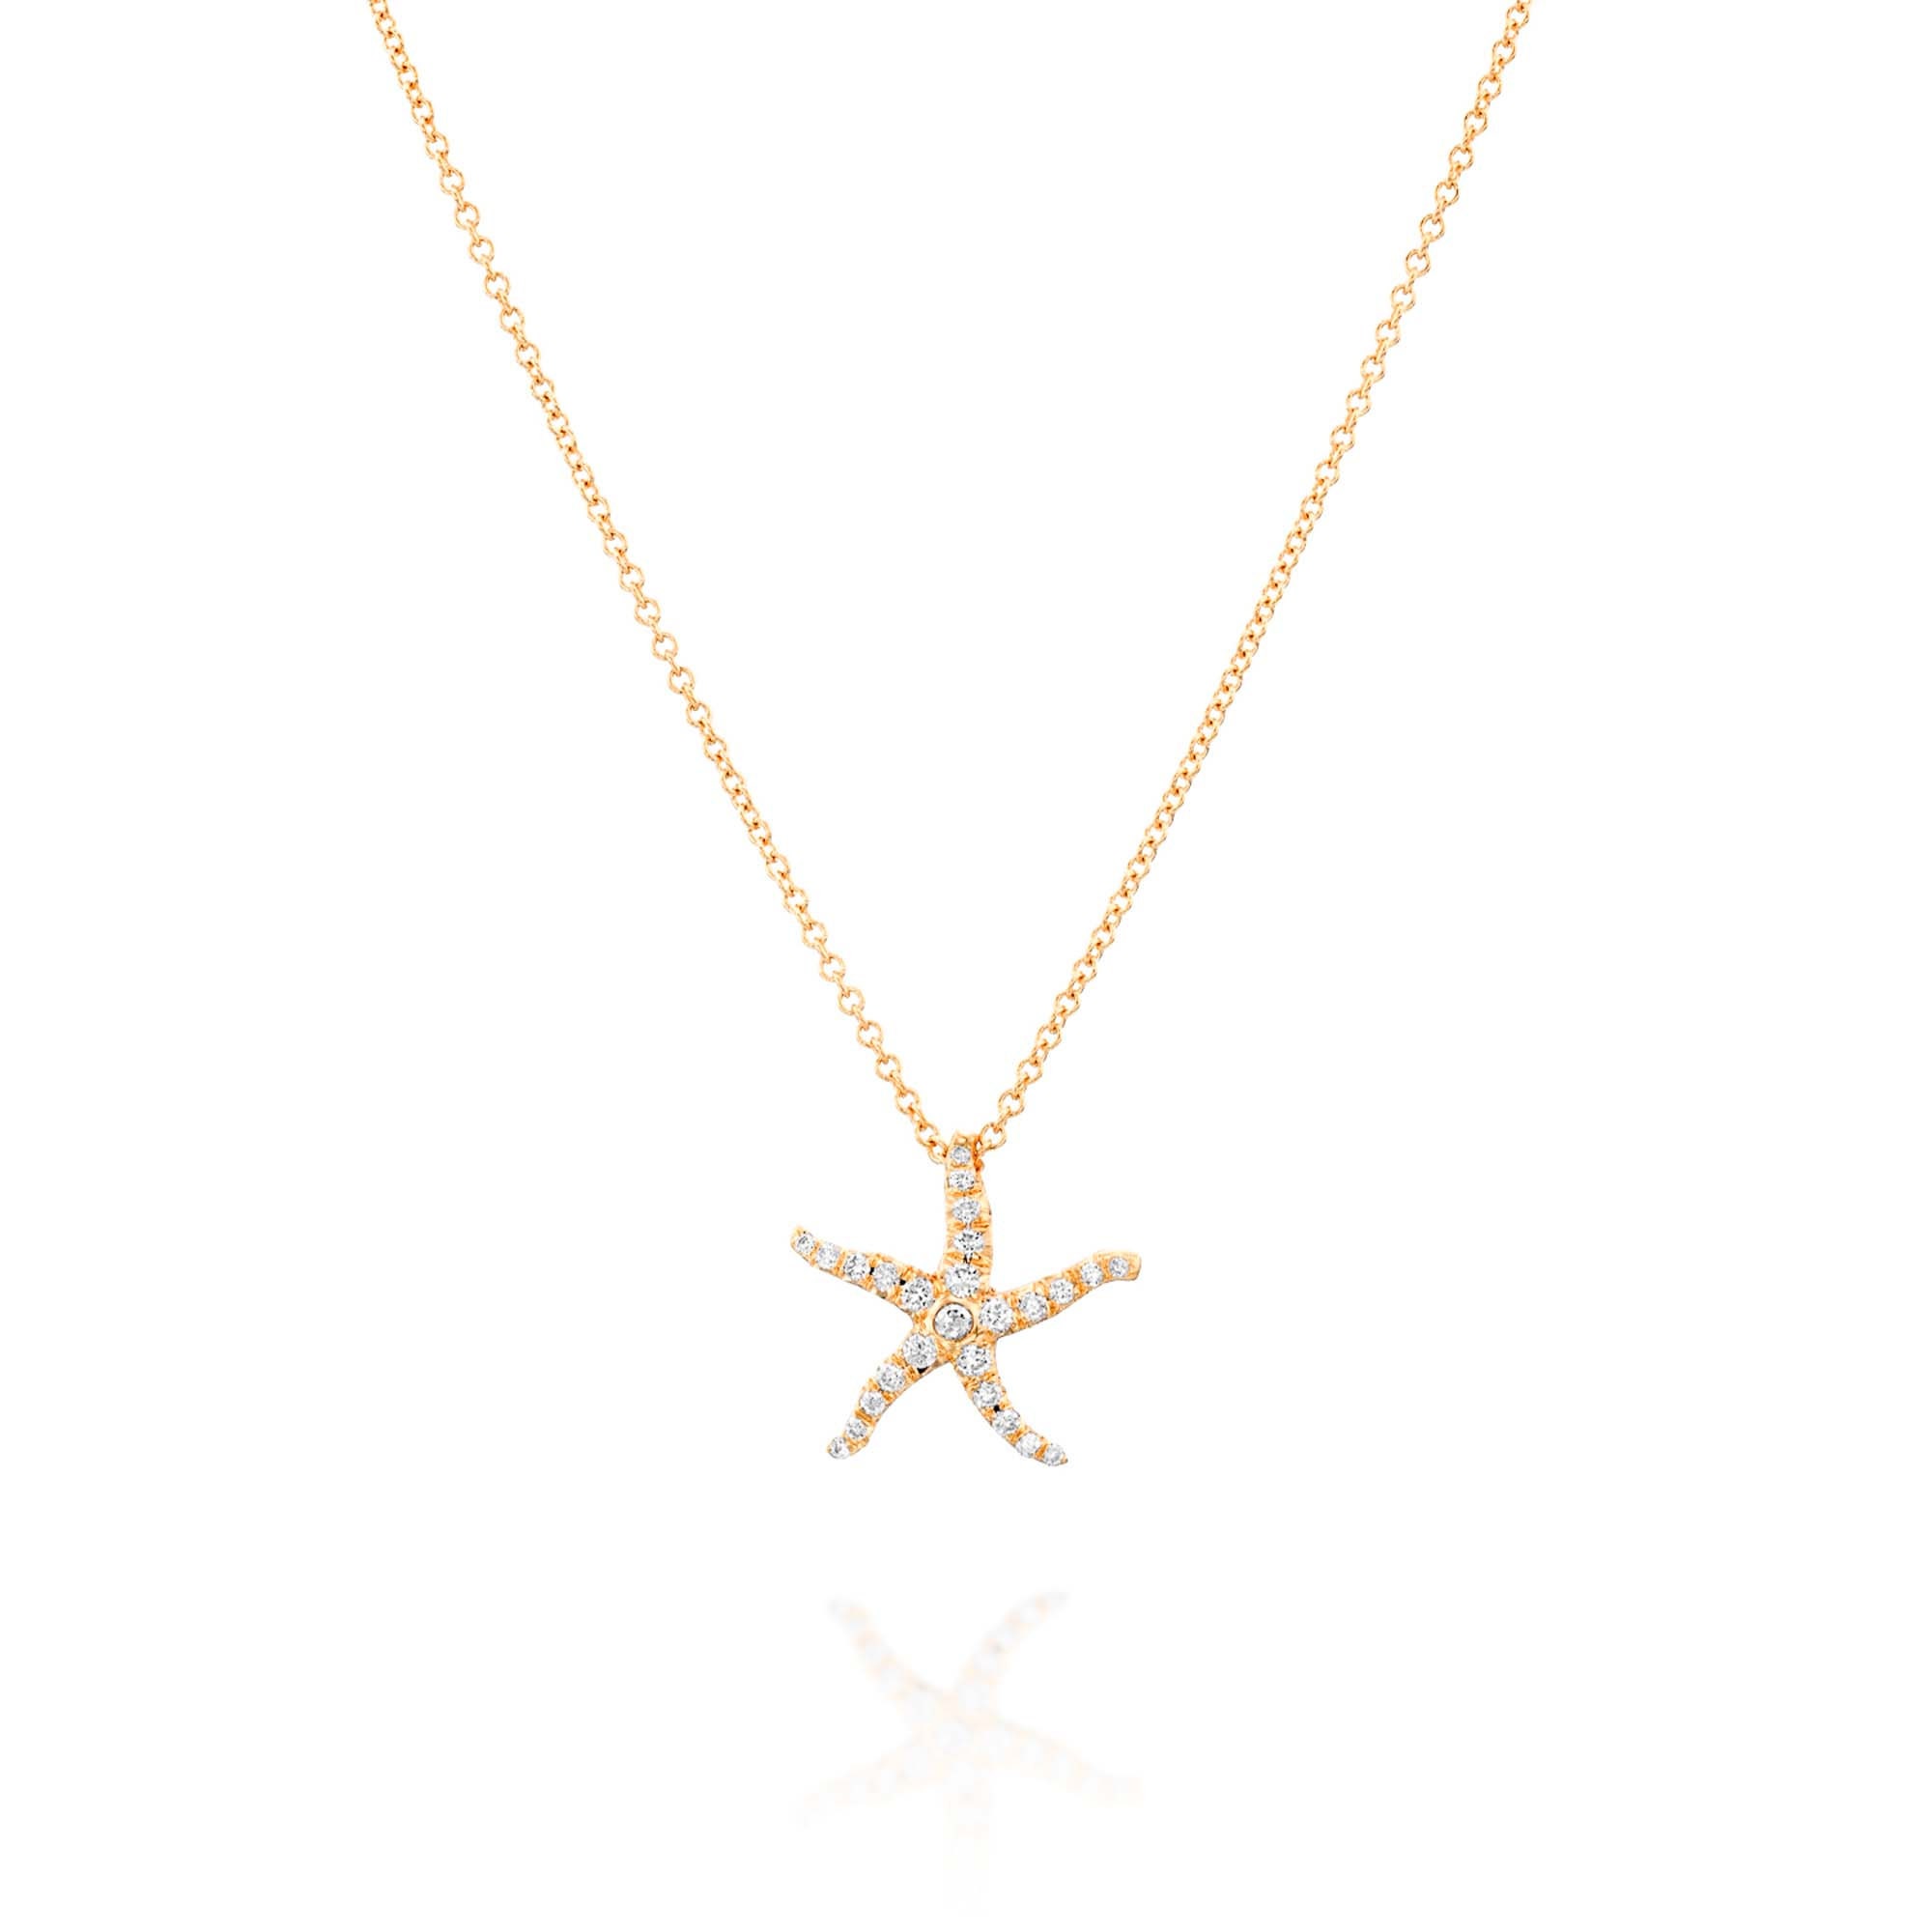 Minimalist Starfish Necklace in 18K Rose Gold with Diamonds (More Colors).thumbnail